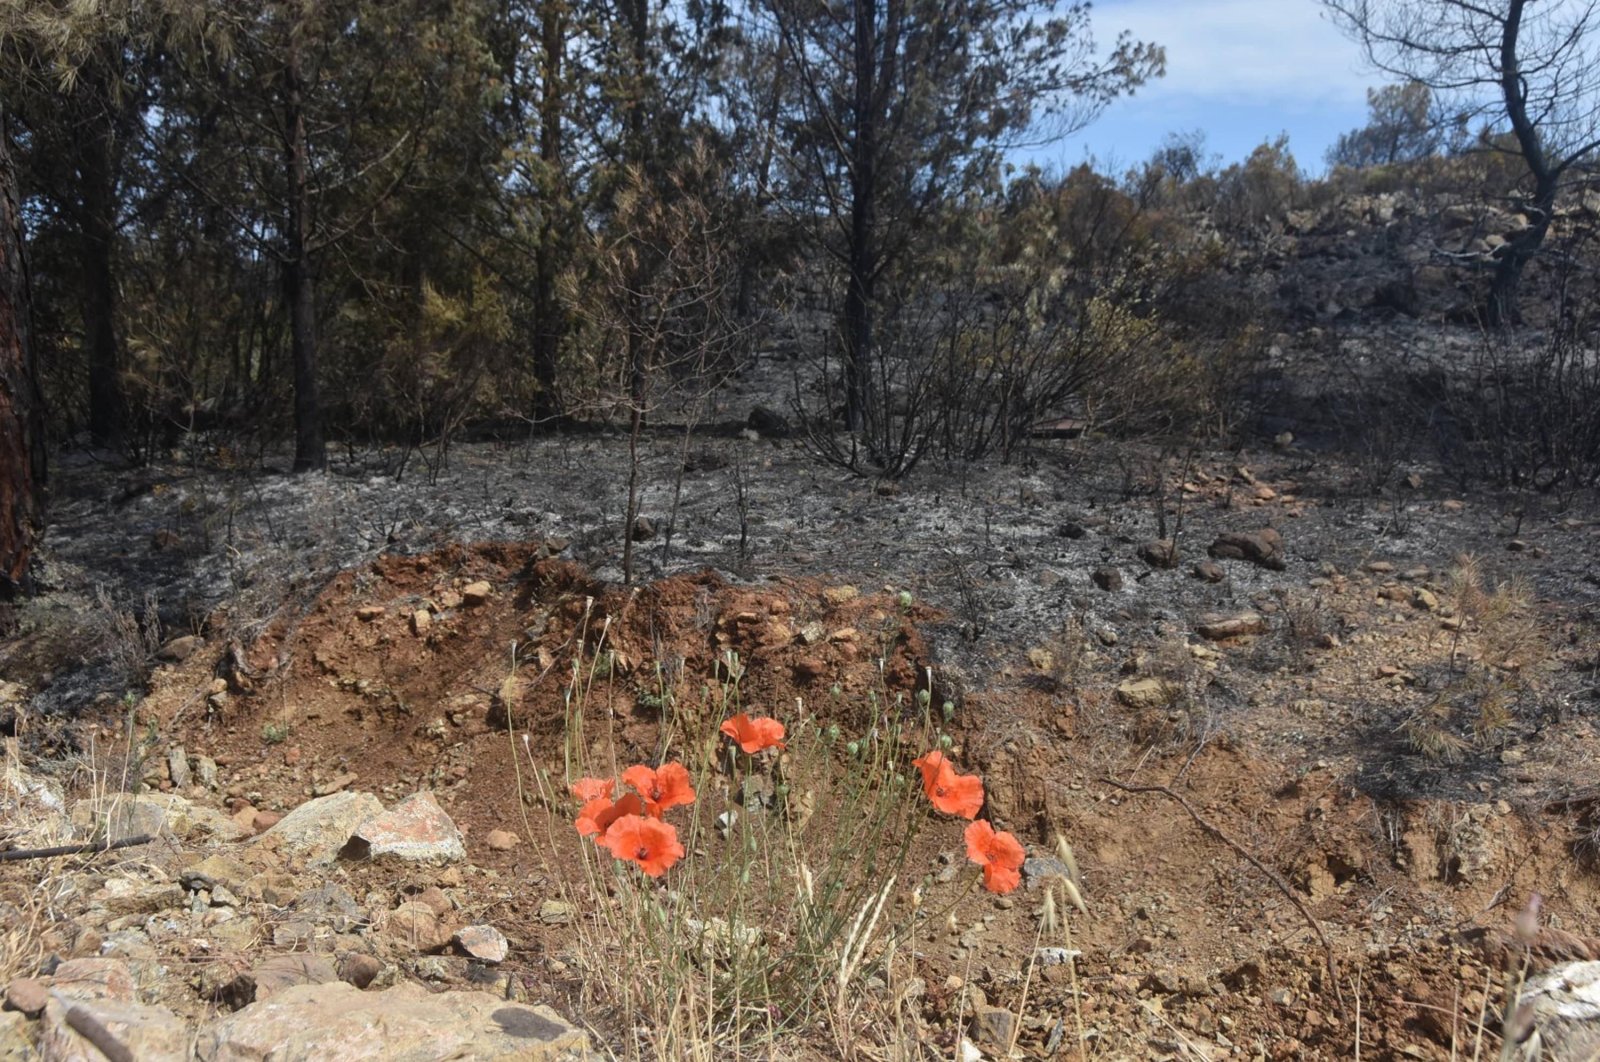 Mountain tulip unharmed by the forest fire is seen in Marmaris, Turkey, June 26, 2022. (DHA Photo)